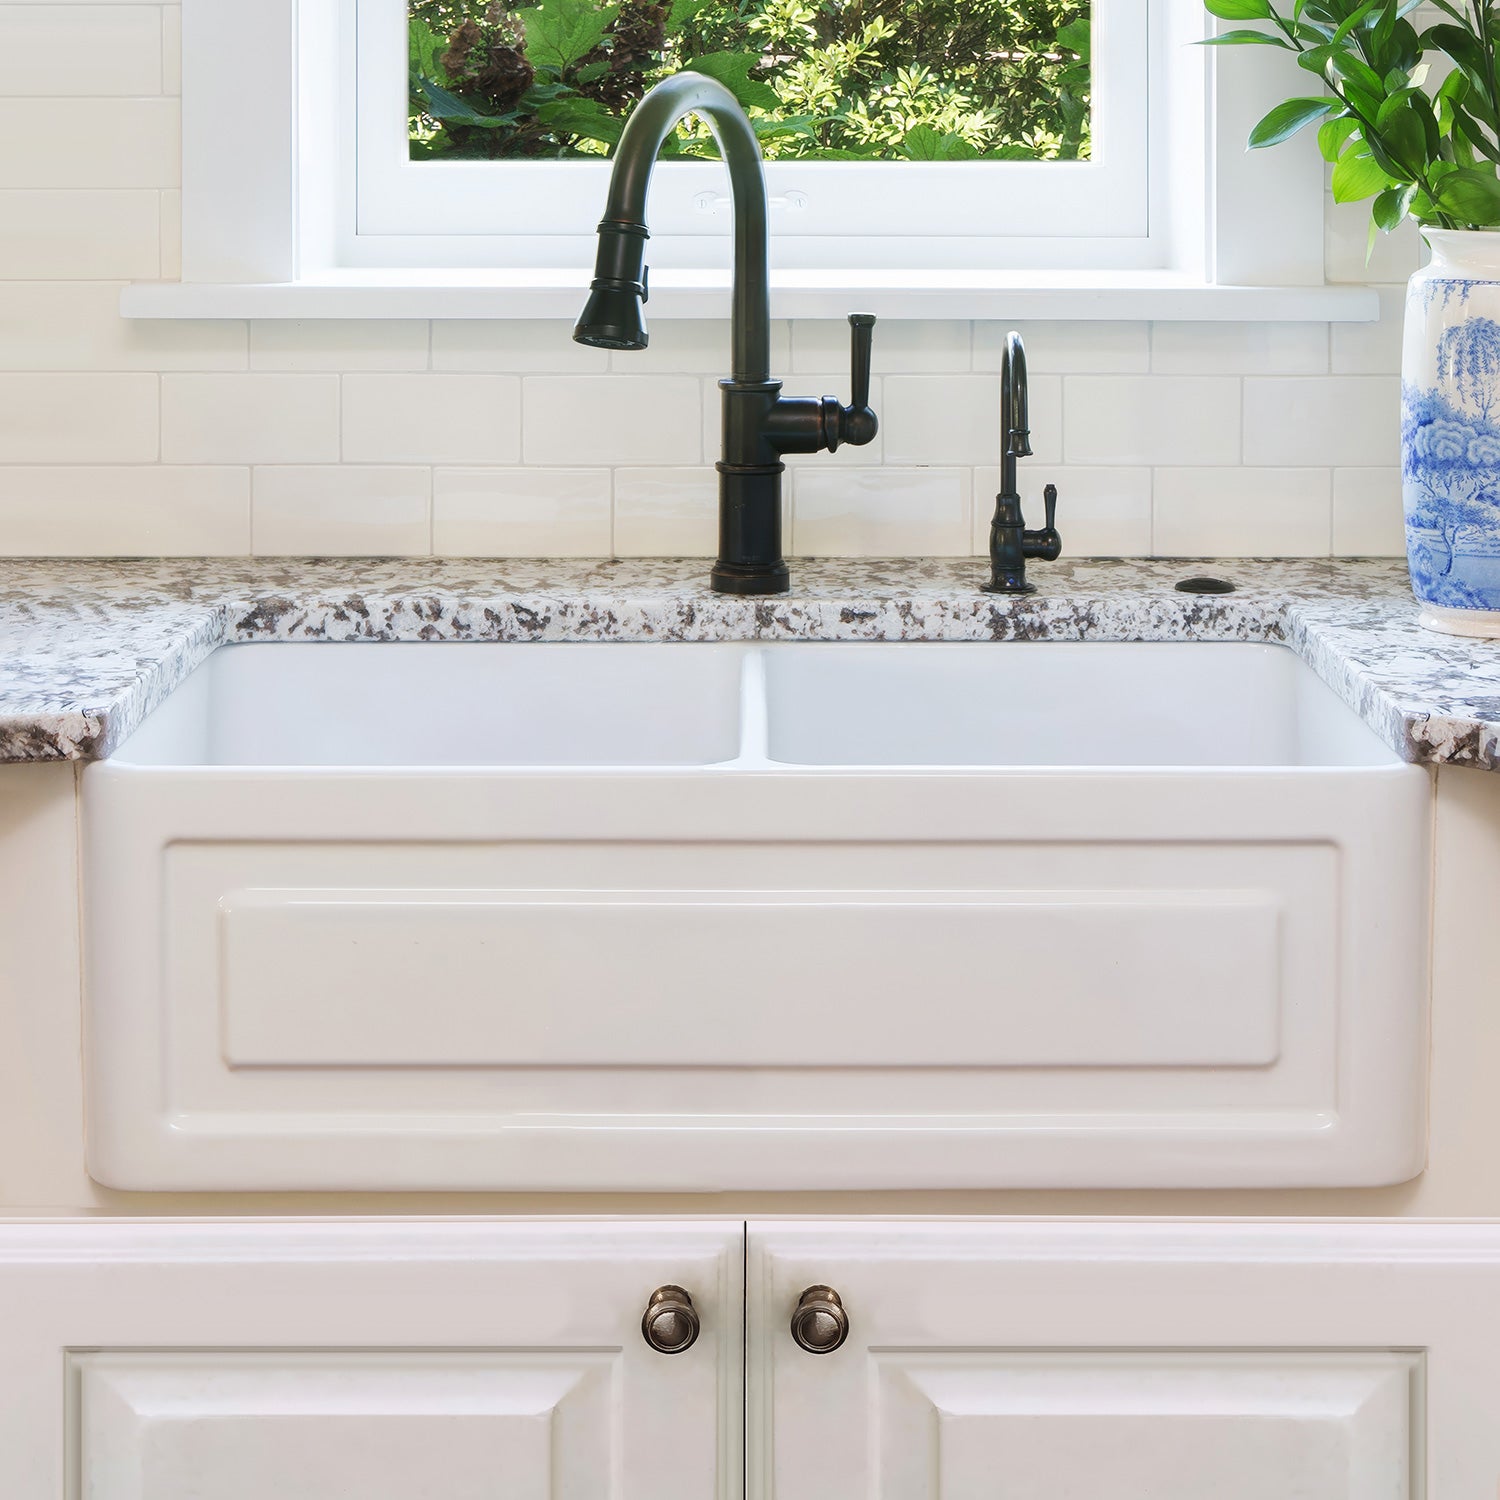 33" double bowl fireclay kitchen sink with reversible front apron